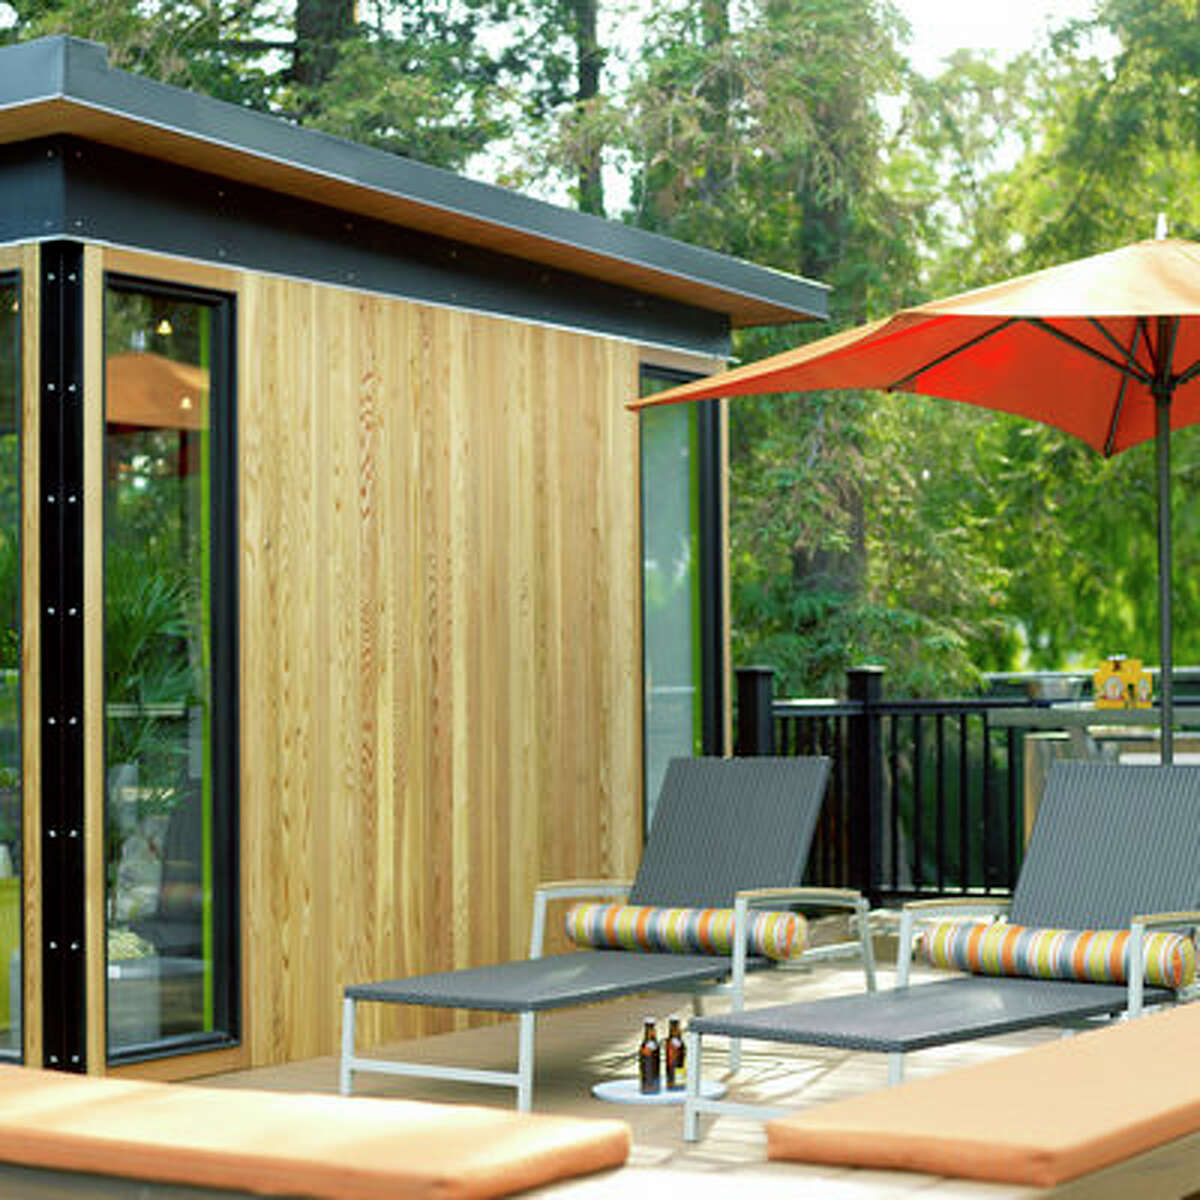 Guest lounge The TimberTech deck around this prefab guest house creates a variety of outdoor destinations, including a barbecue kitchen and lounge area. On the other side of the structure, the deck connects the guest suite with an outdoor shower and a small office. See more of this modern cottage